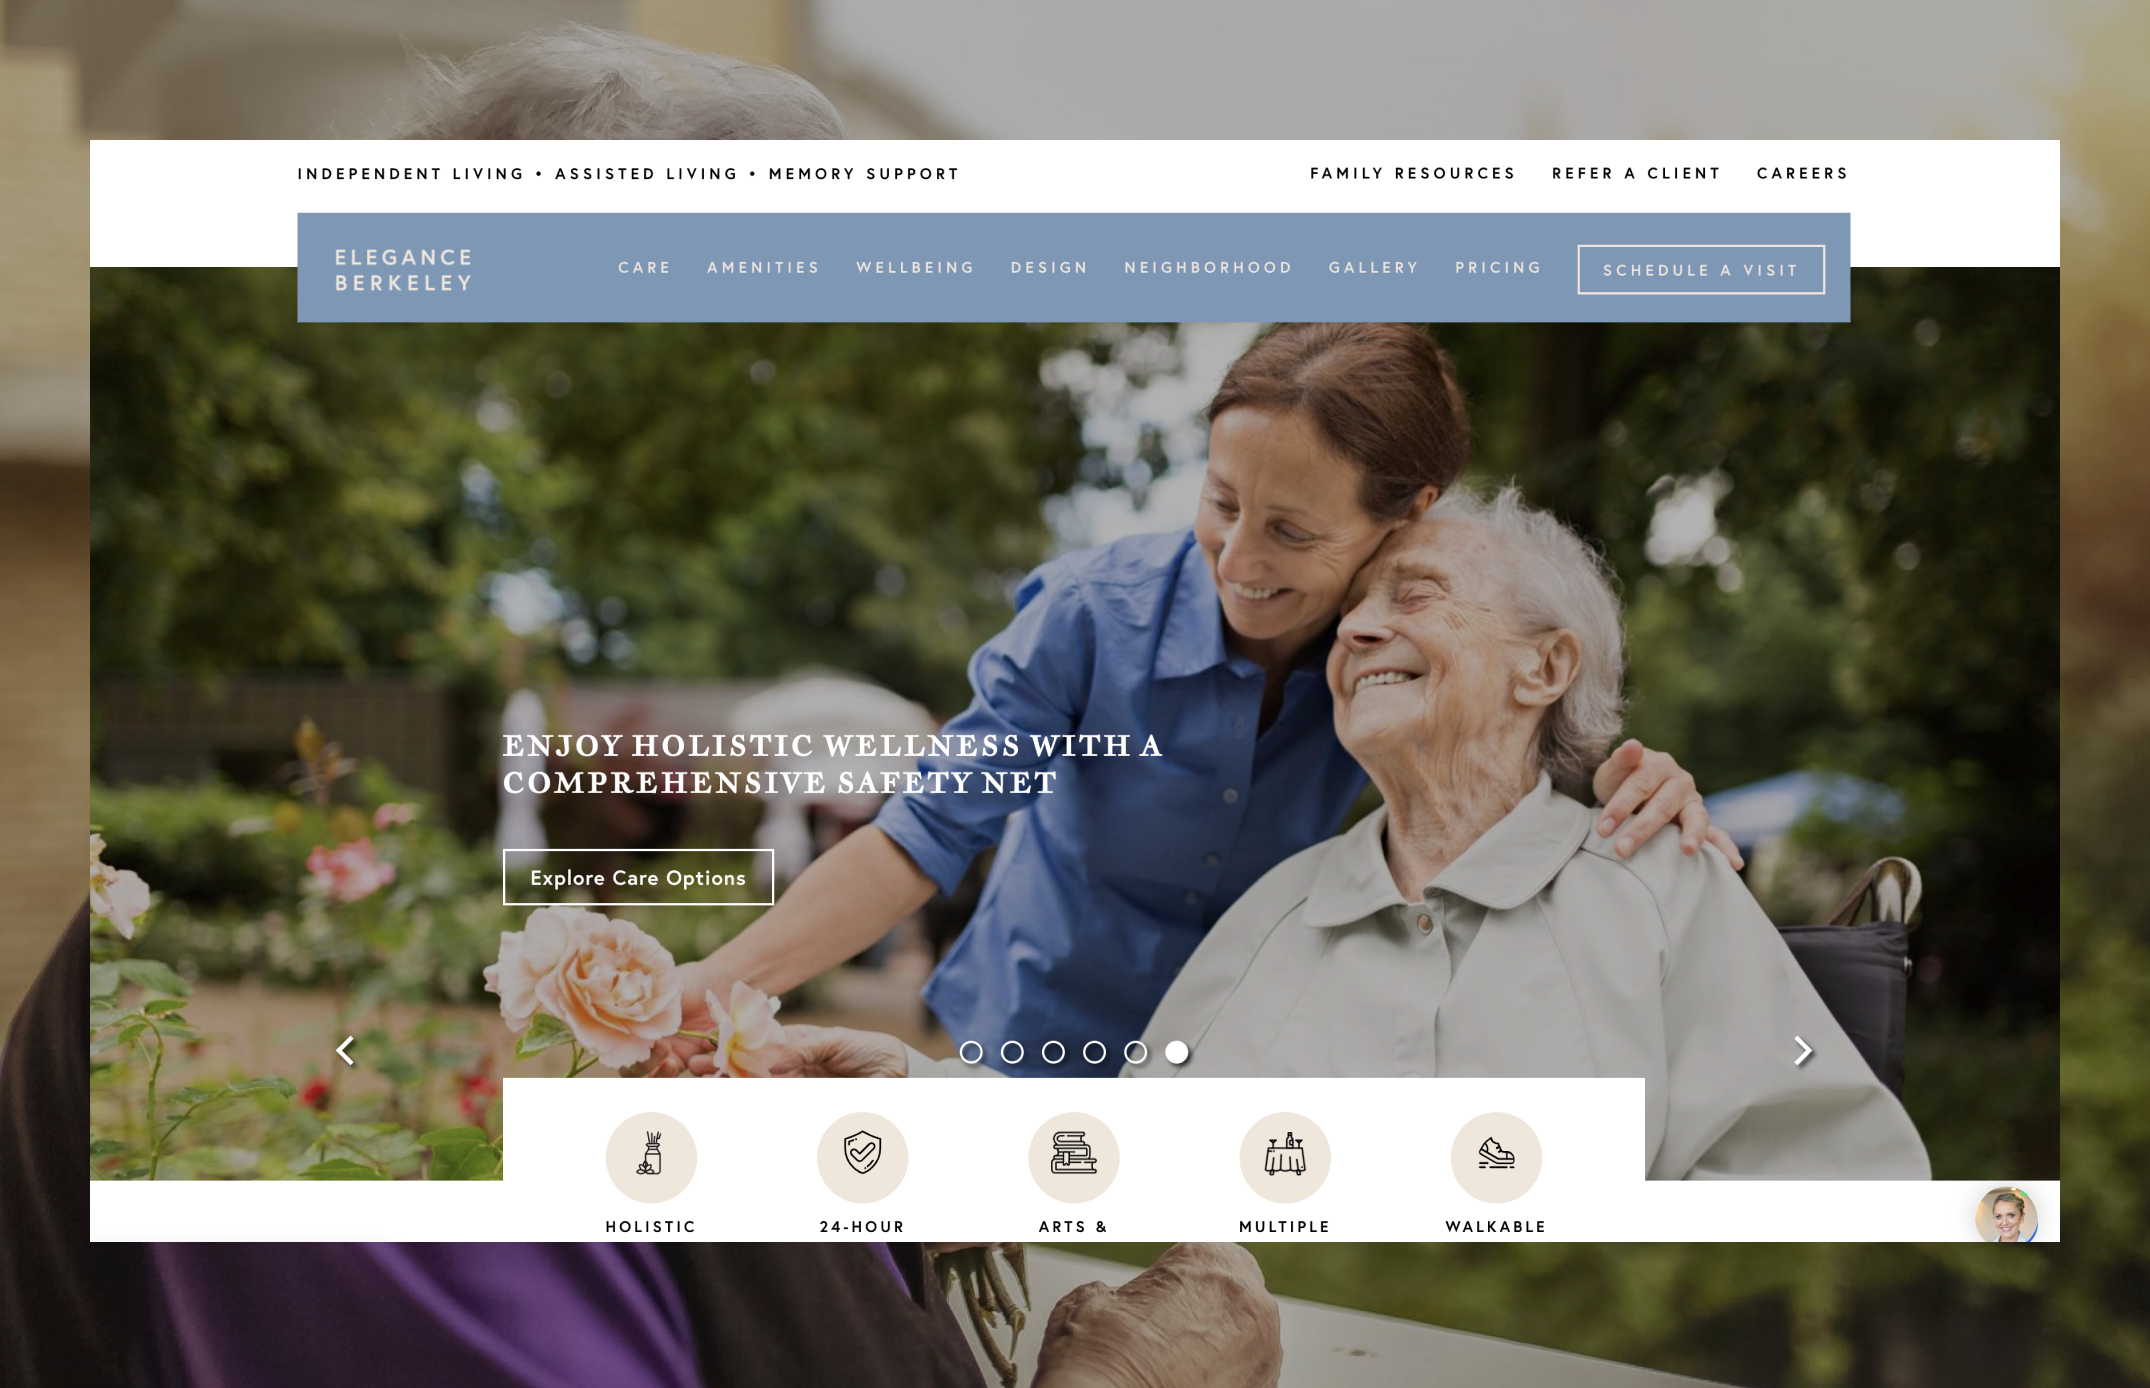 Image of the elegance website homepage featuring an elderly person and adult person smiling and hugging each other by a garden of roses